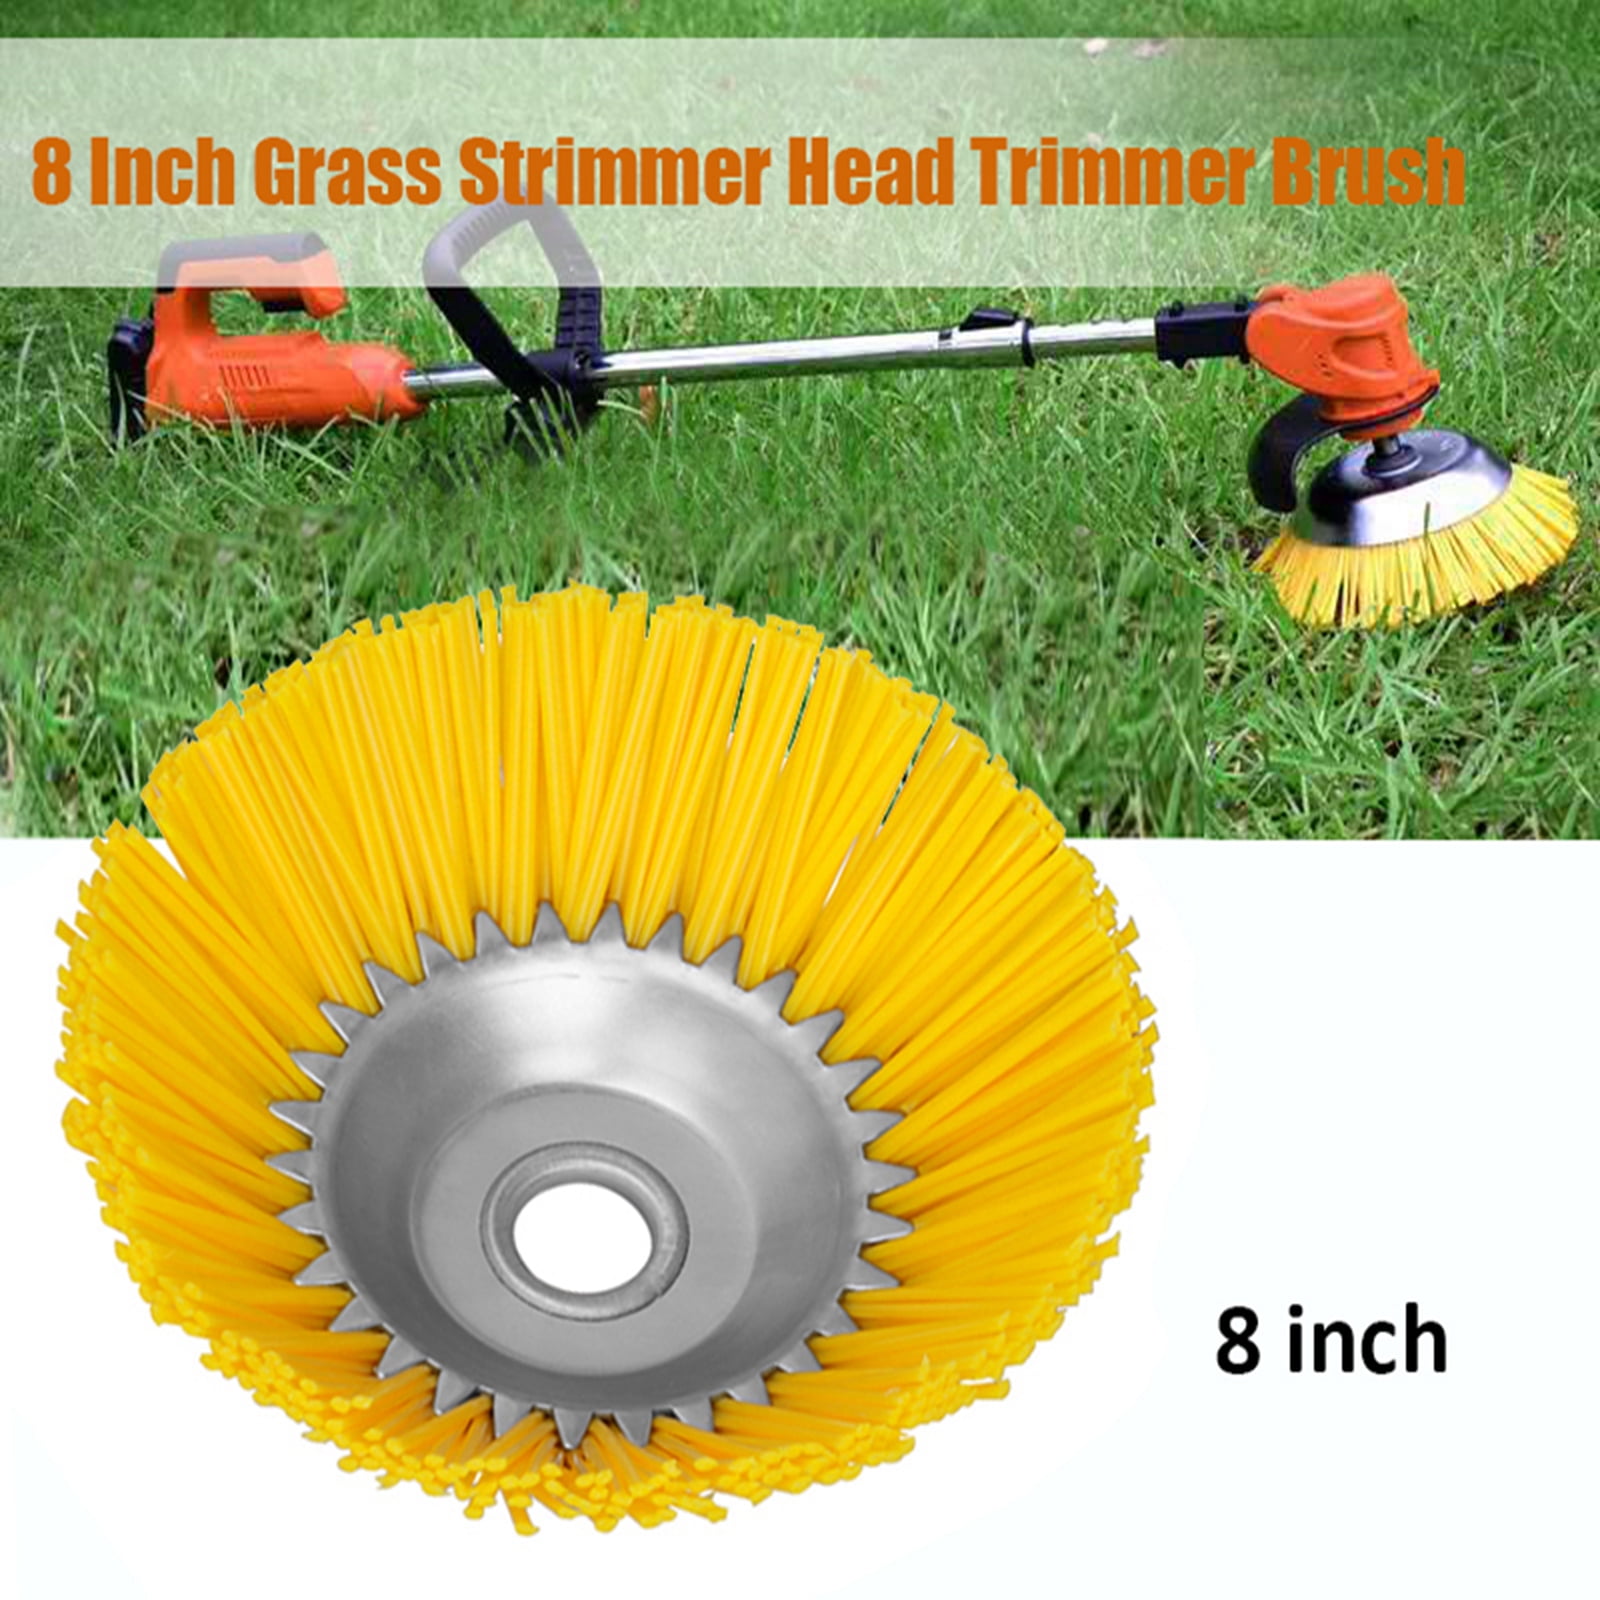 1x6" Trimmer Head Grass Strimmer Wire Wheel Mower Weed Brush For Dust Removal